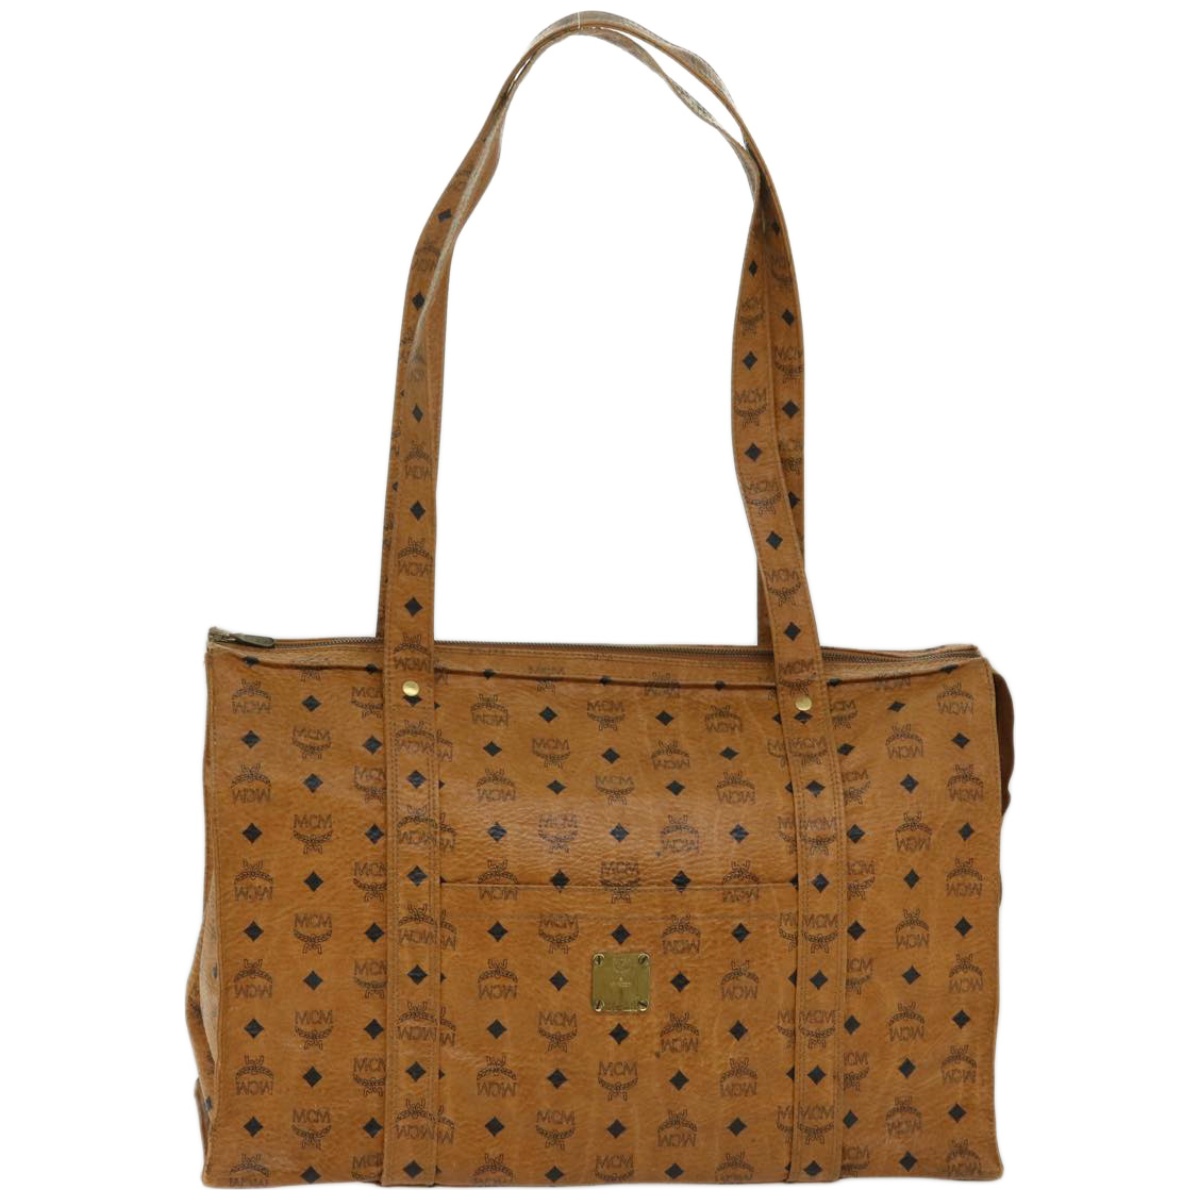 German-Made Brown Canvas Tote Bag with PVC Leather Design